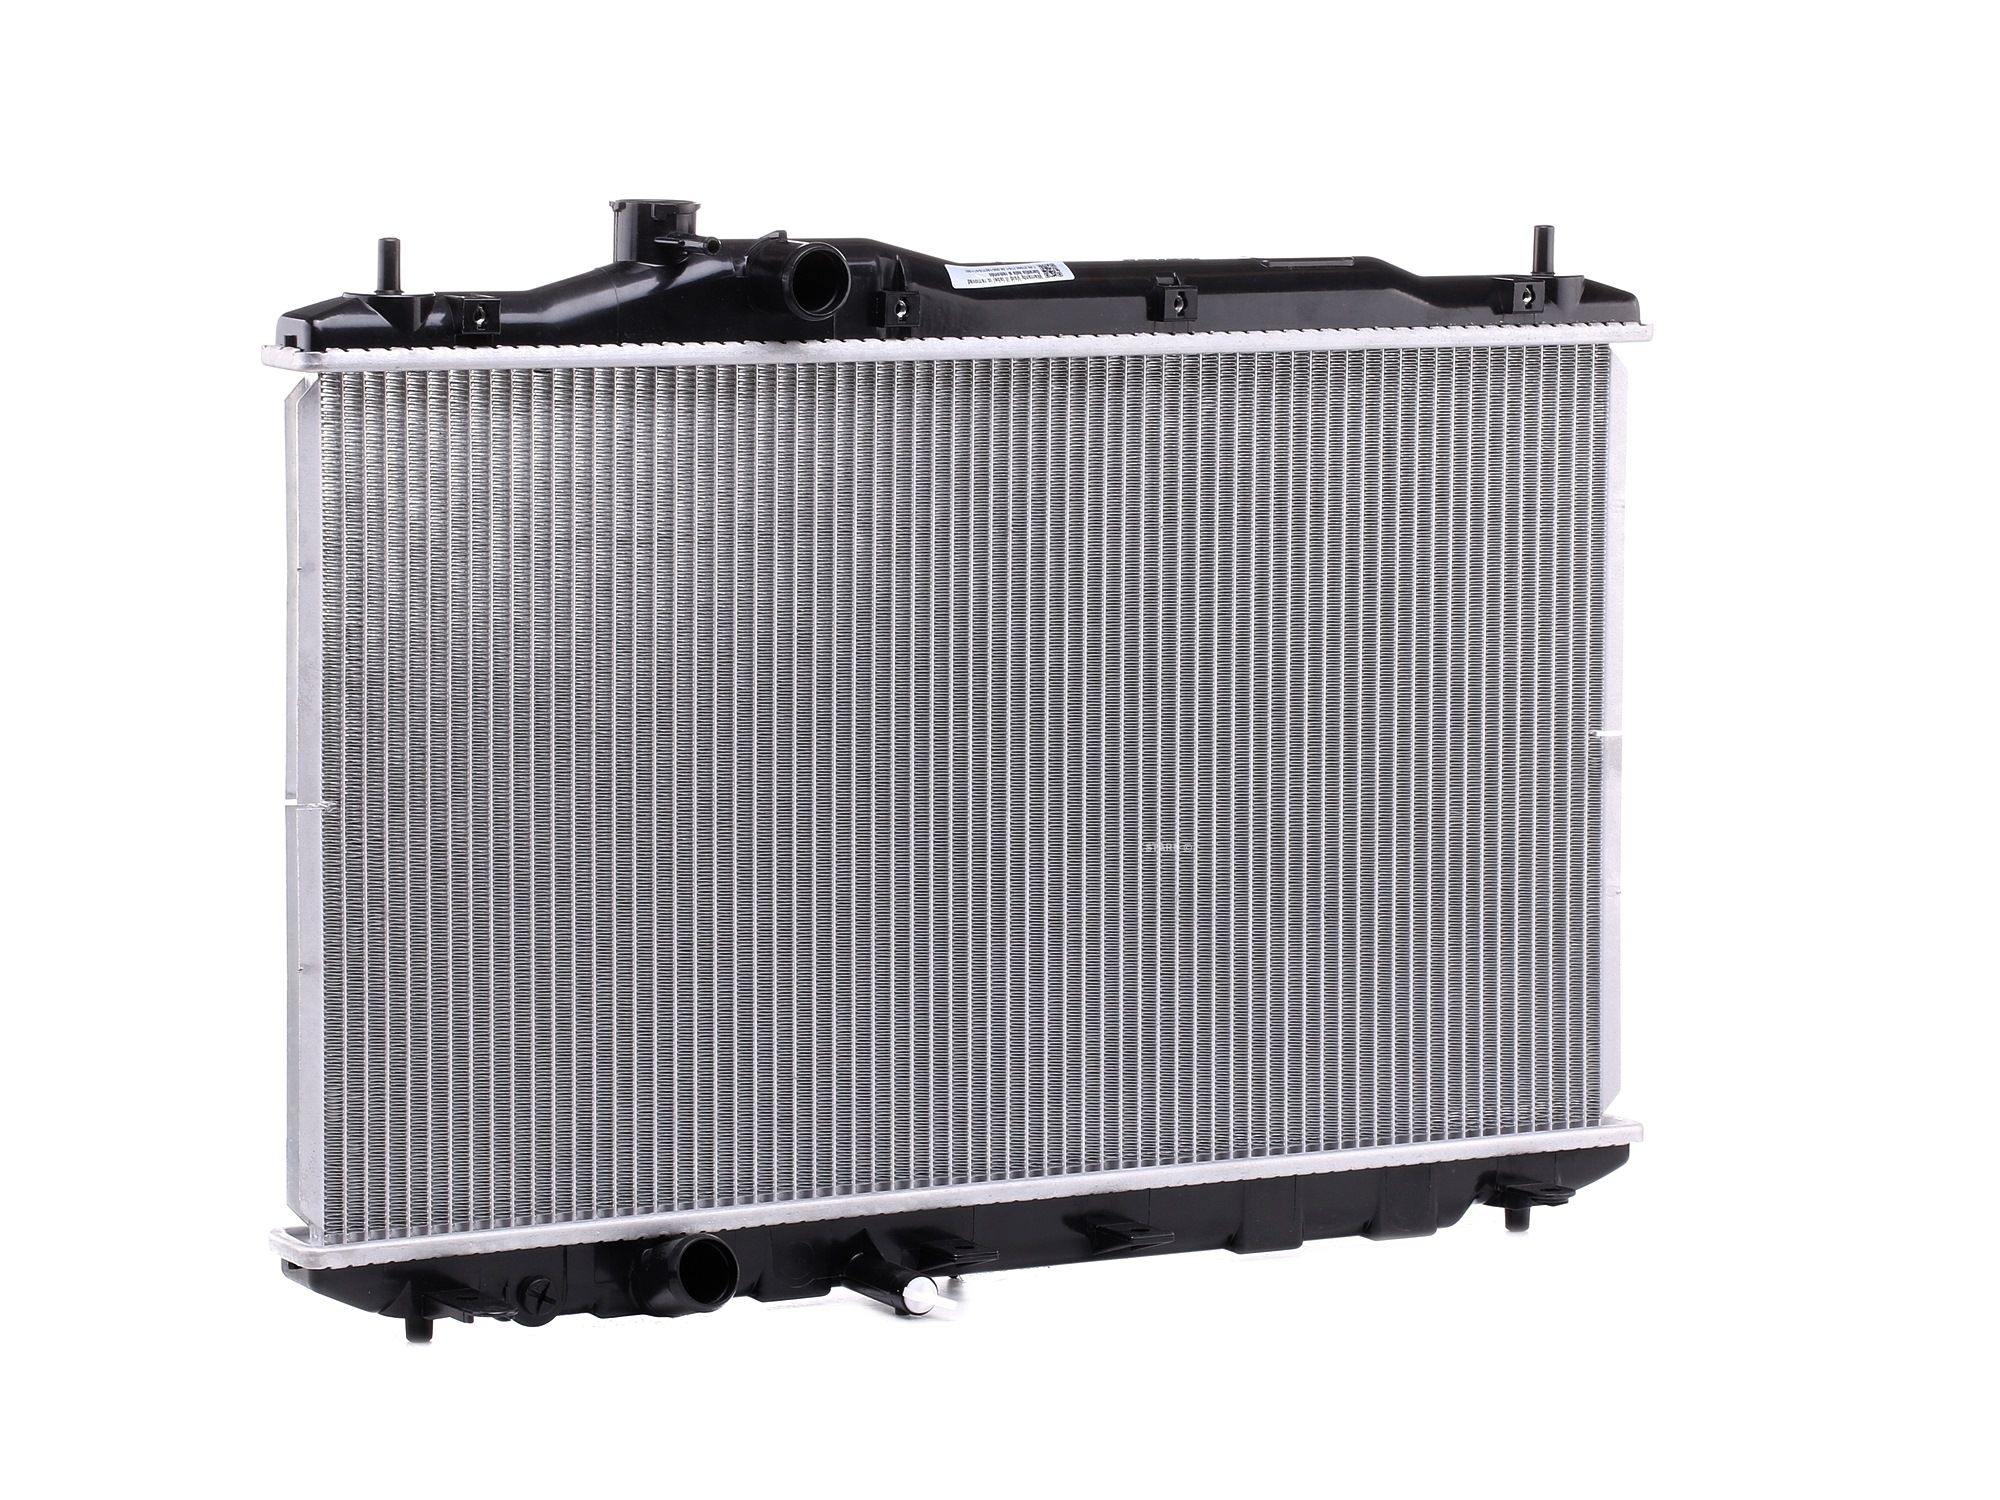 STARK SKRD-0120436 Engine radiator Aluminium, for vehicles with/without air conditioning, Manual Transmission